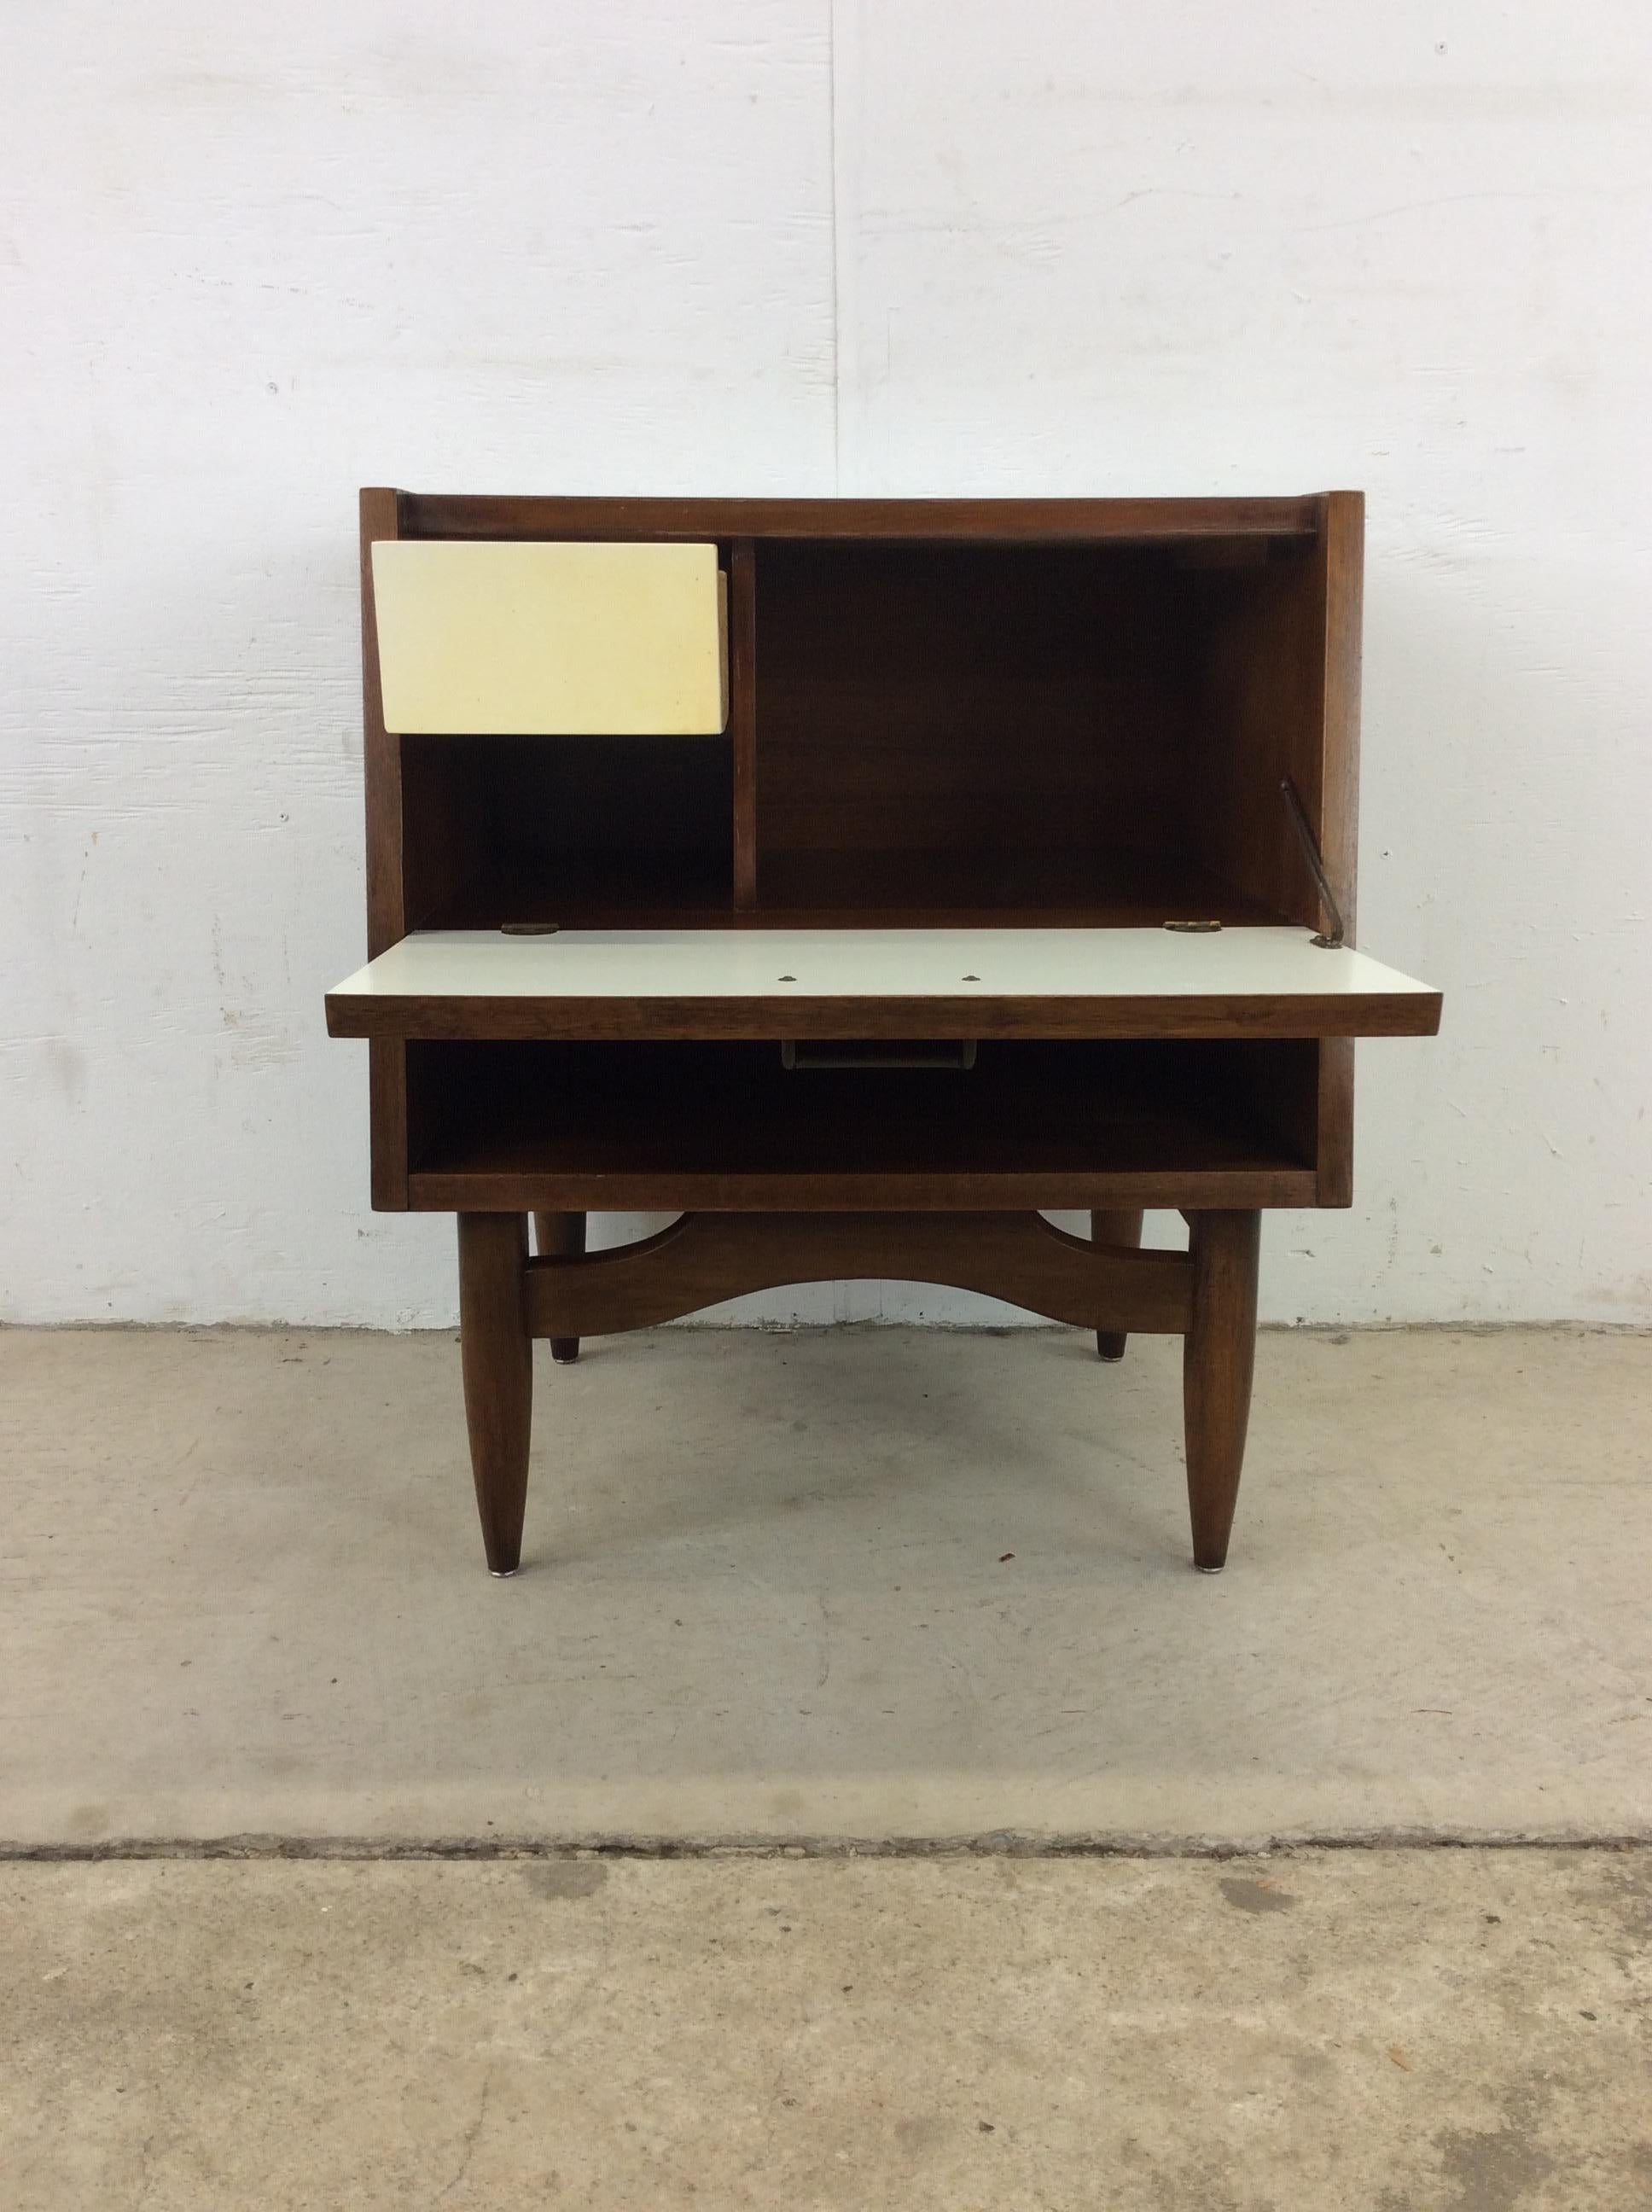 Mid-Century Modern Nightstand from Dania Series by American of Martinsville For Sale 2